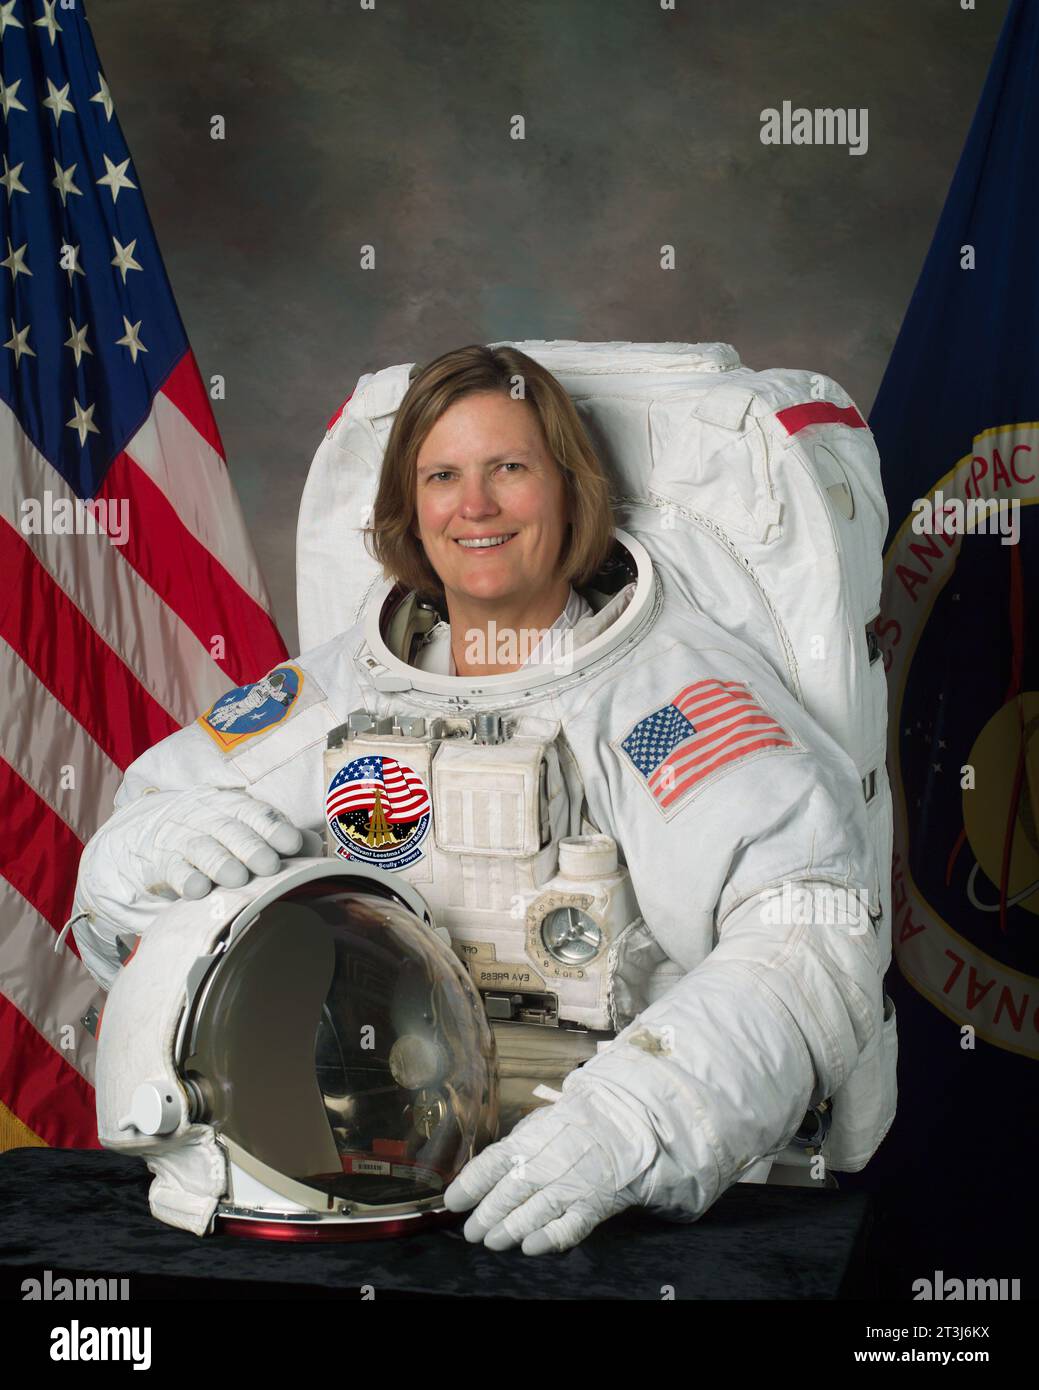 Kathryn Sullivan, Dr. Kathryn Sullivan was selected for astronaut training in January 1978 and flew on 3 Space Shuttle missions: STS-41G, STS-31, and STS-45. On her first mission, she became the first American woman to walk in space on October 11, 1984. Stock Photo